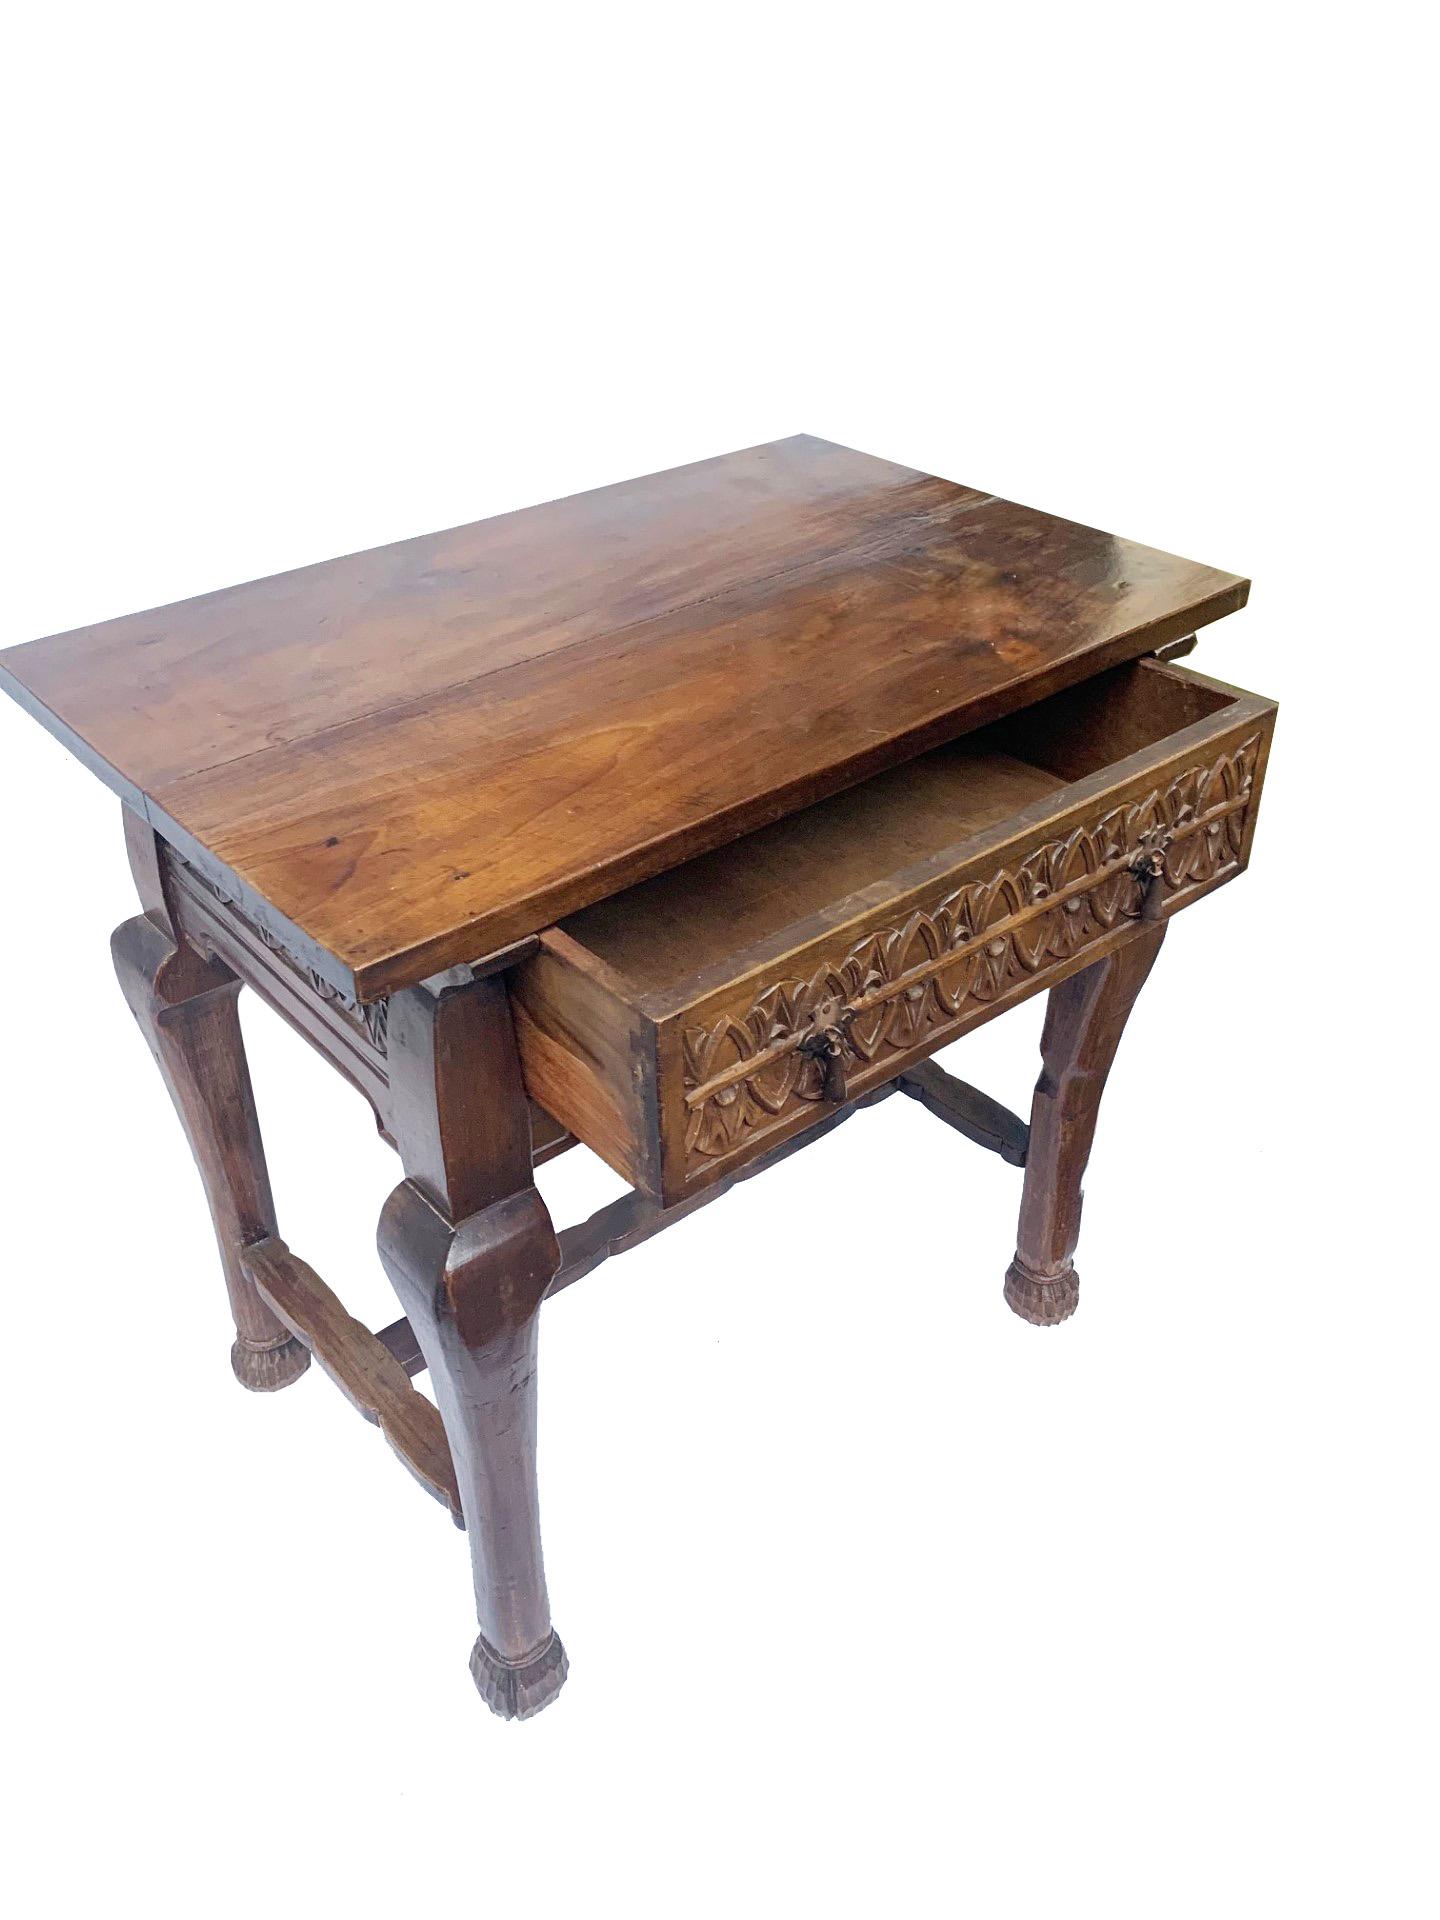 Mid-20th Century Circa 1940 Spanish Colonial Revival Sideboard Table Console For Sale